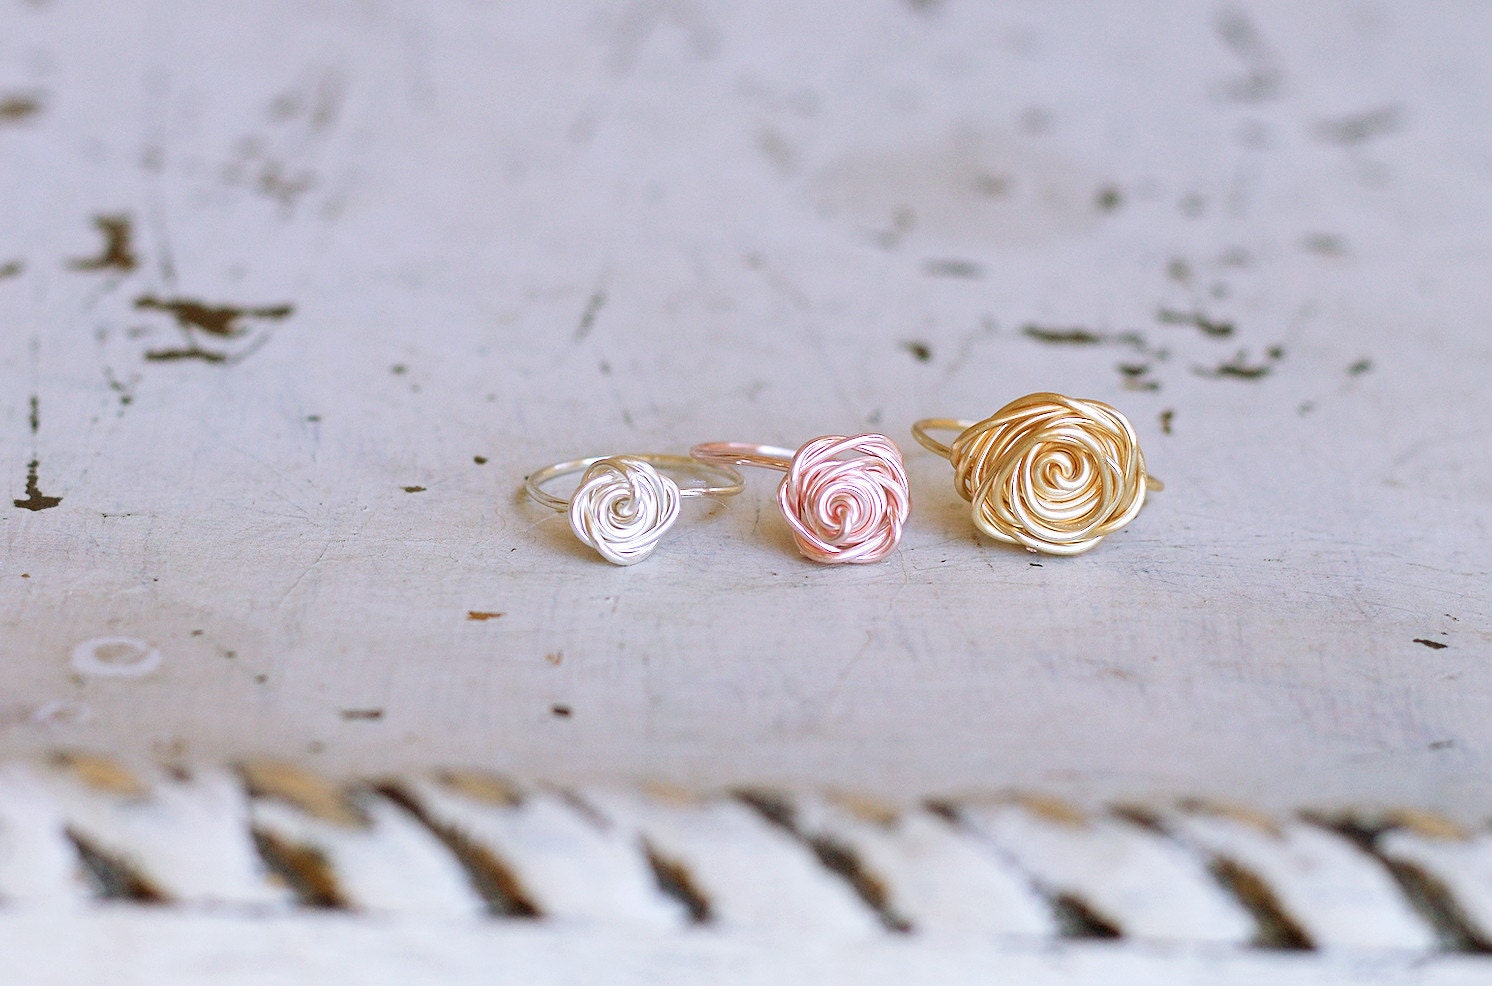 Rose Ring Rose Gold ,14K Gold-Filled, Sterling Silver, Flower Girl, Girlfriend Gift, Bridesmaids Ring, Valentine's ,Anniversary